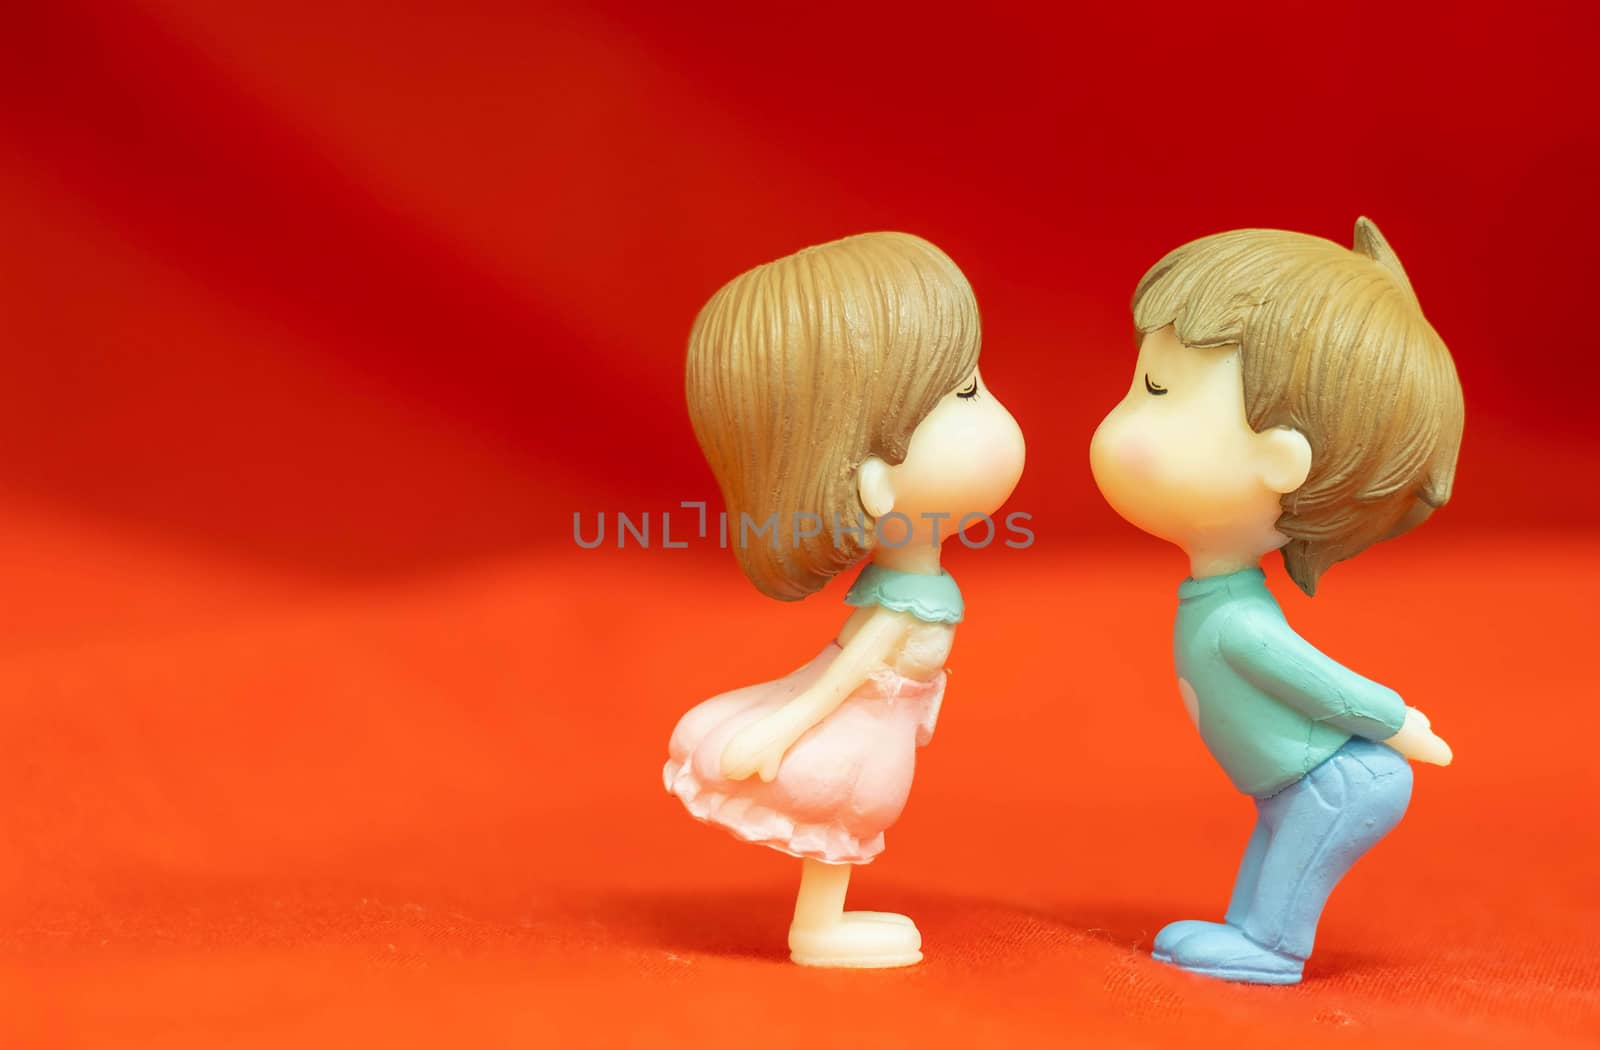 The Miniature Couple dolls Boy and Girl Romantic Kiss on Red Bac by Bonn2210